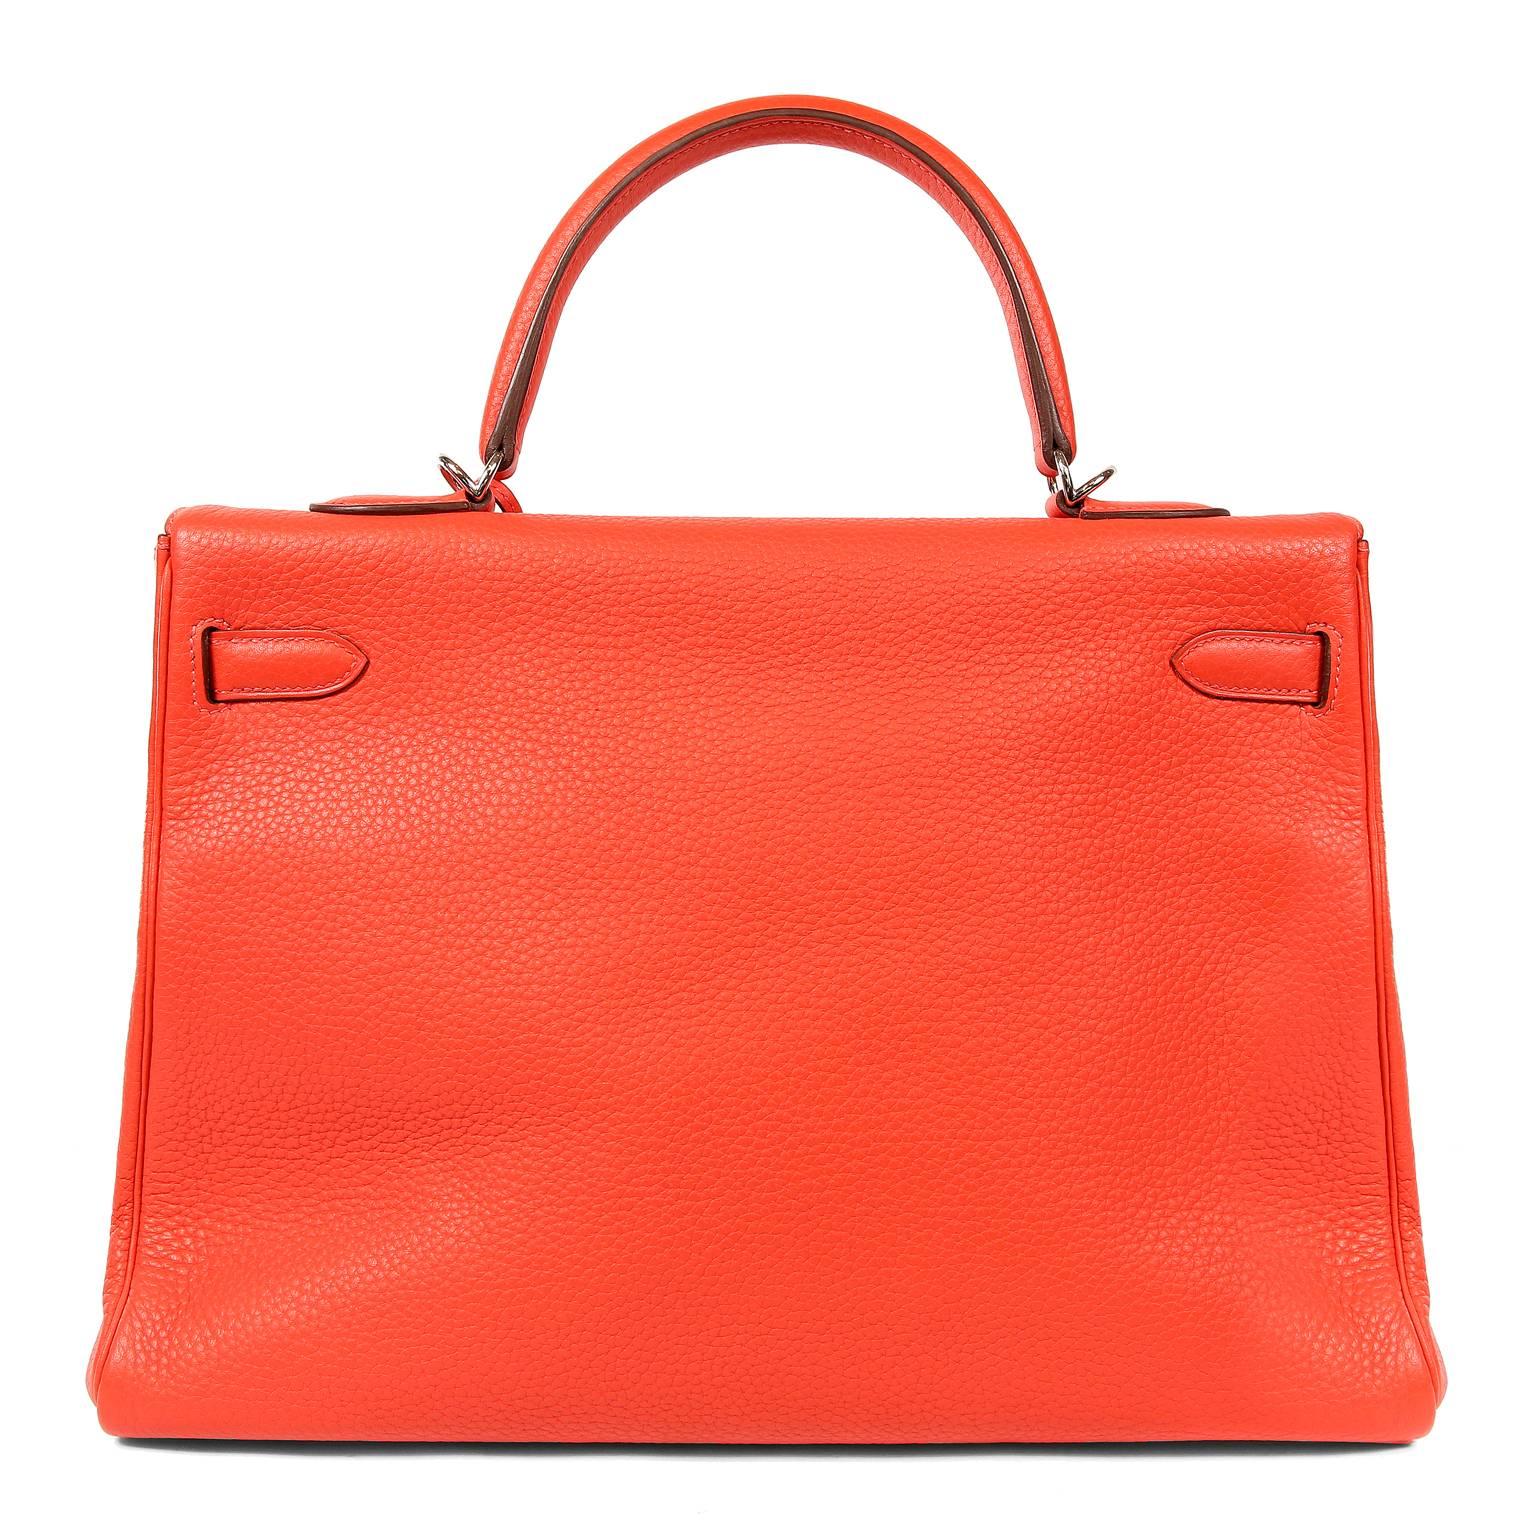 Hermès Rose Jaipur Togo 35 cm Kelly- Pristine Condition
Hermès bags are considered the ultimate luxury item worldwide.  Each piece is handcrafted with waitlists that can exceed a year or more.  The ladylike Kelly is classic and refined, a beautiful